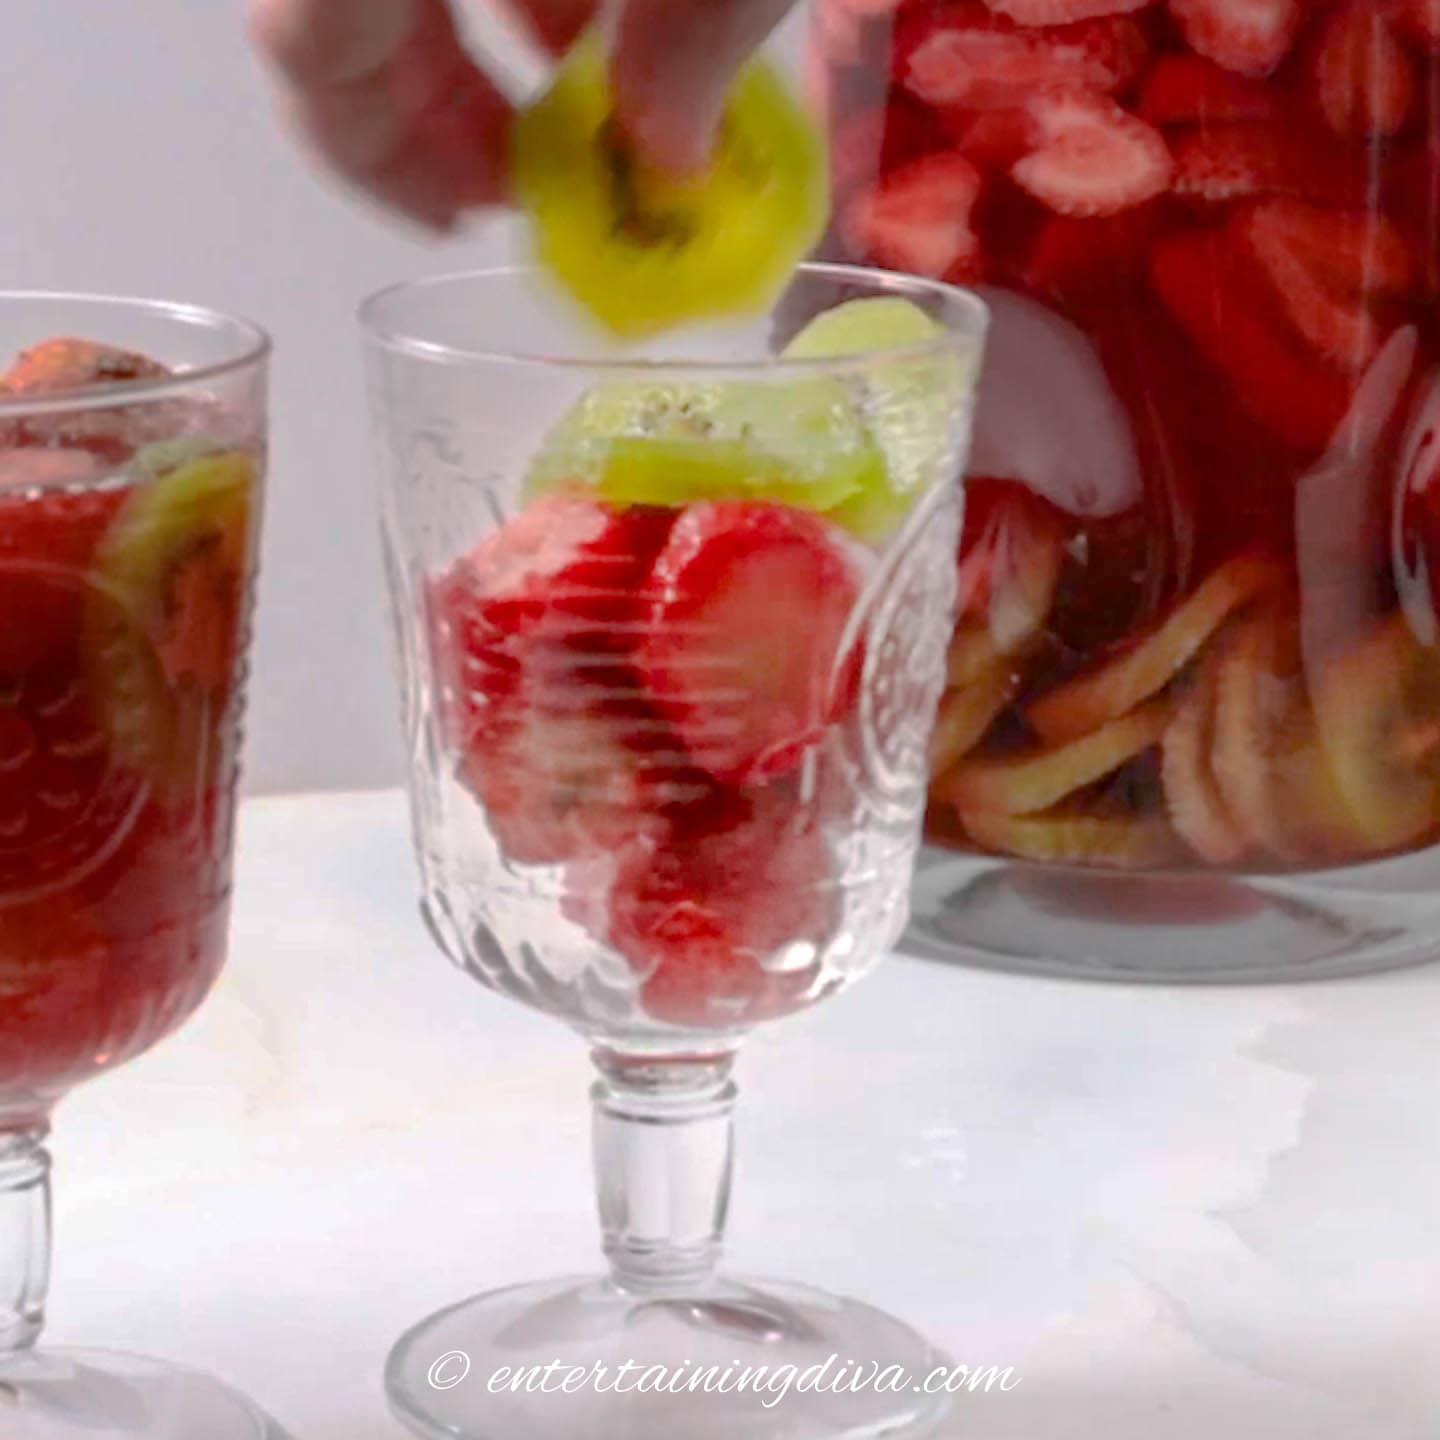 kiwis and strawberries in a glass